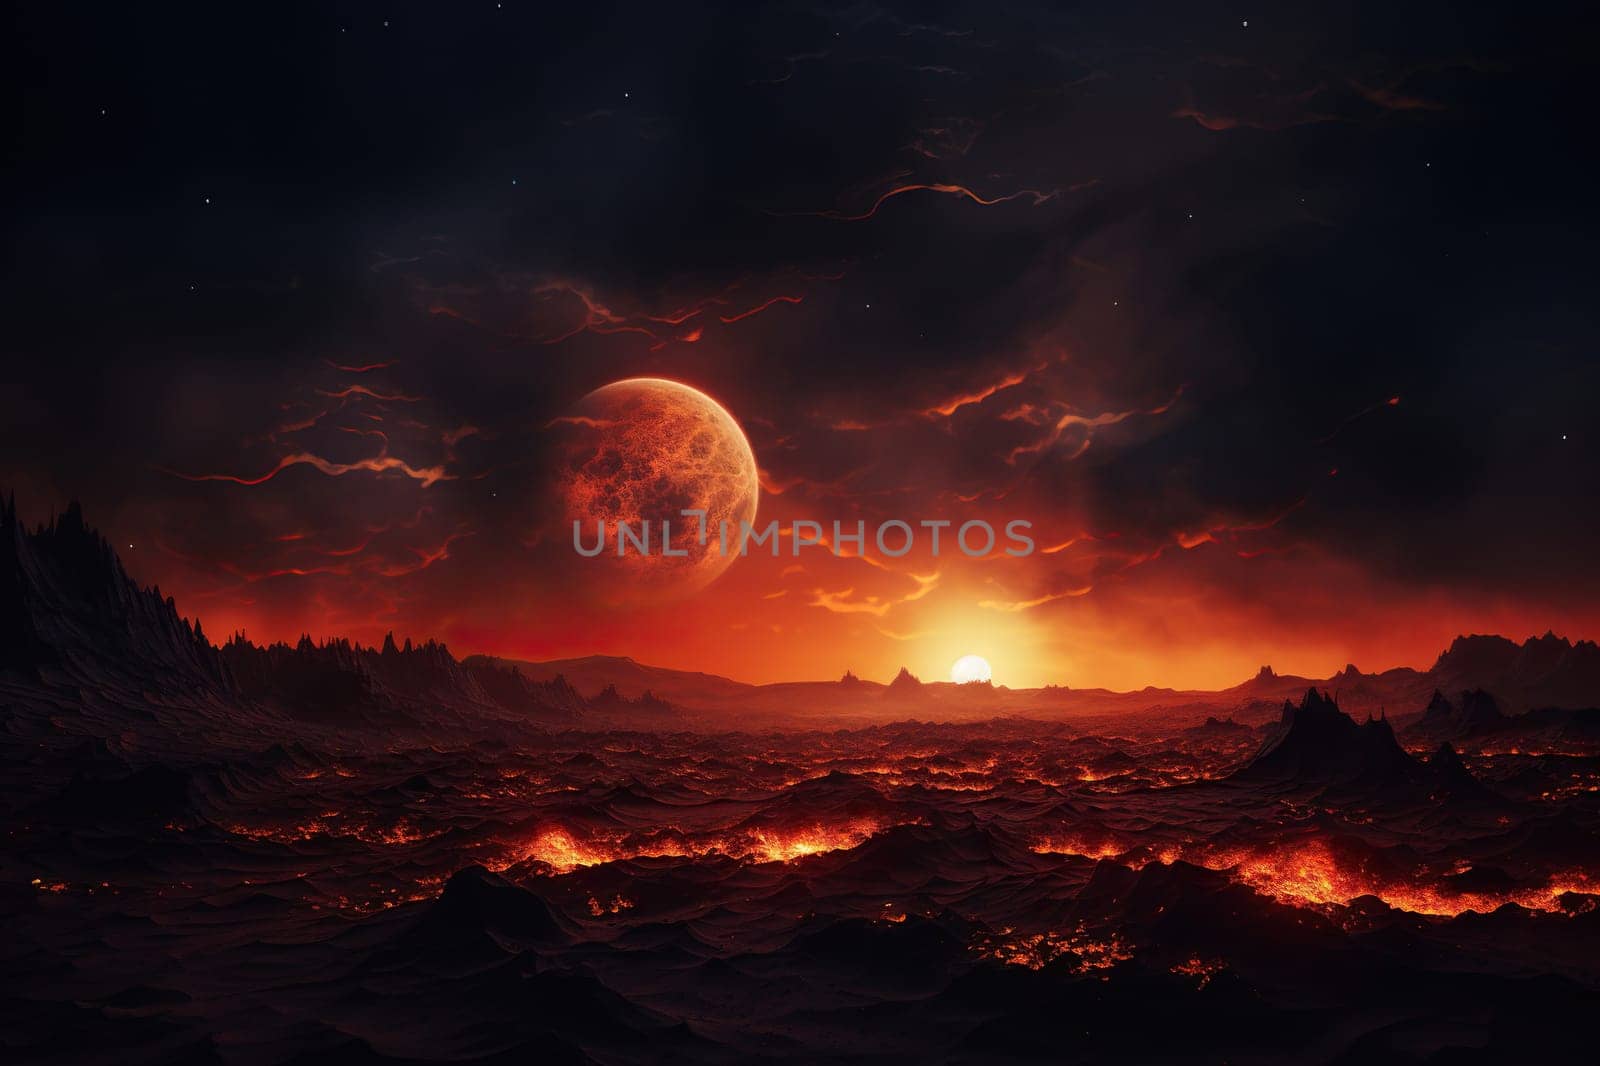 Surface of a fantasy planet with charred and burned earth and smoke. A celestial body is visible in the cloudy sky.